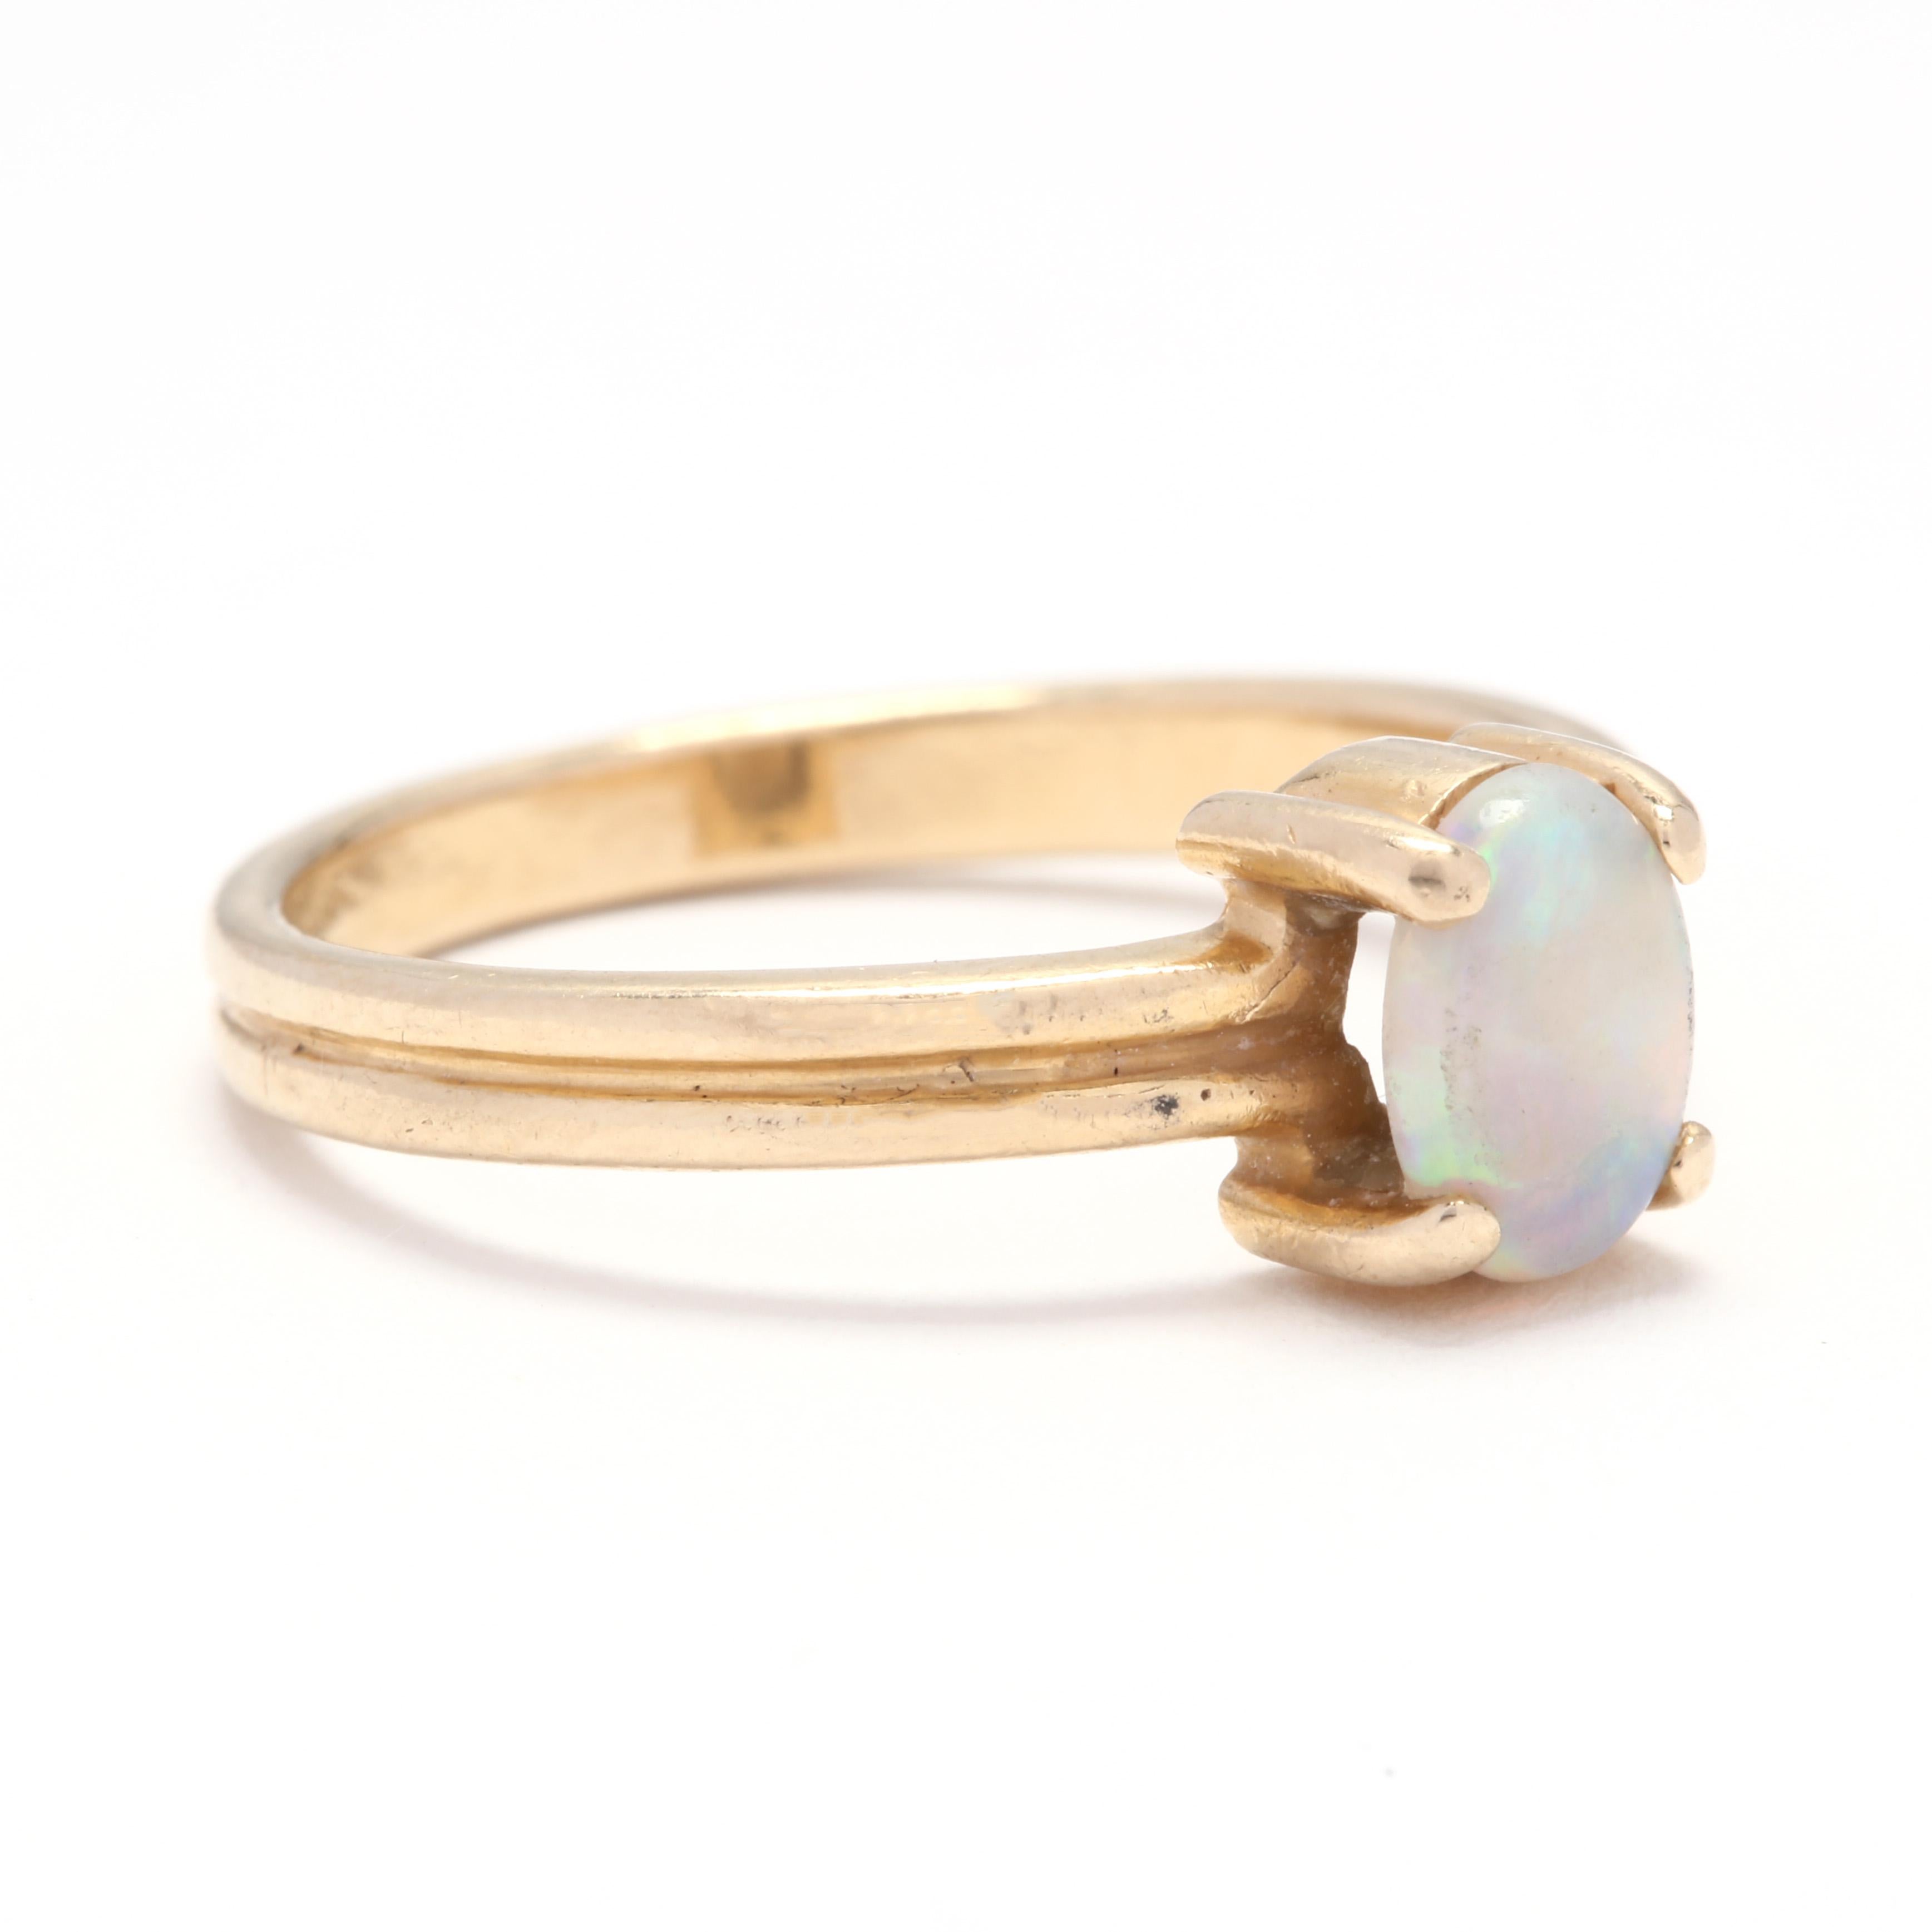 A 14 karat yellow gold and opal solitaire ring. This ring features a prong set, oval cabochon opal set on a ridged band.

Stone:
- opal
- oval cabochon, 1 stone
- 6.97 x 4.96 x 1.88 mm
- approximately .50 carat

Ring Size 6.75

1.79 dwts.

* Please